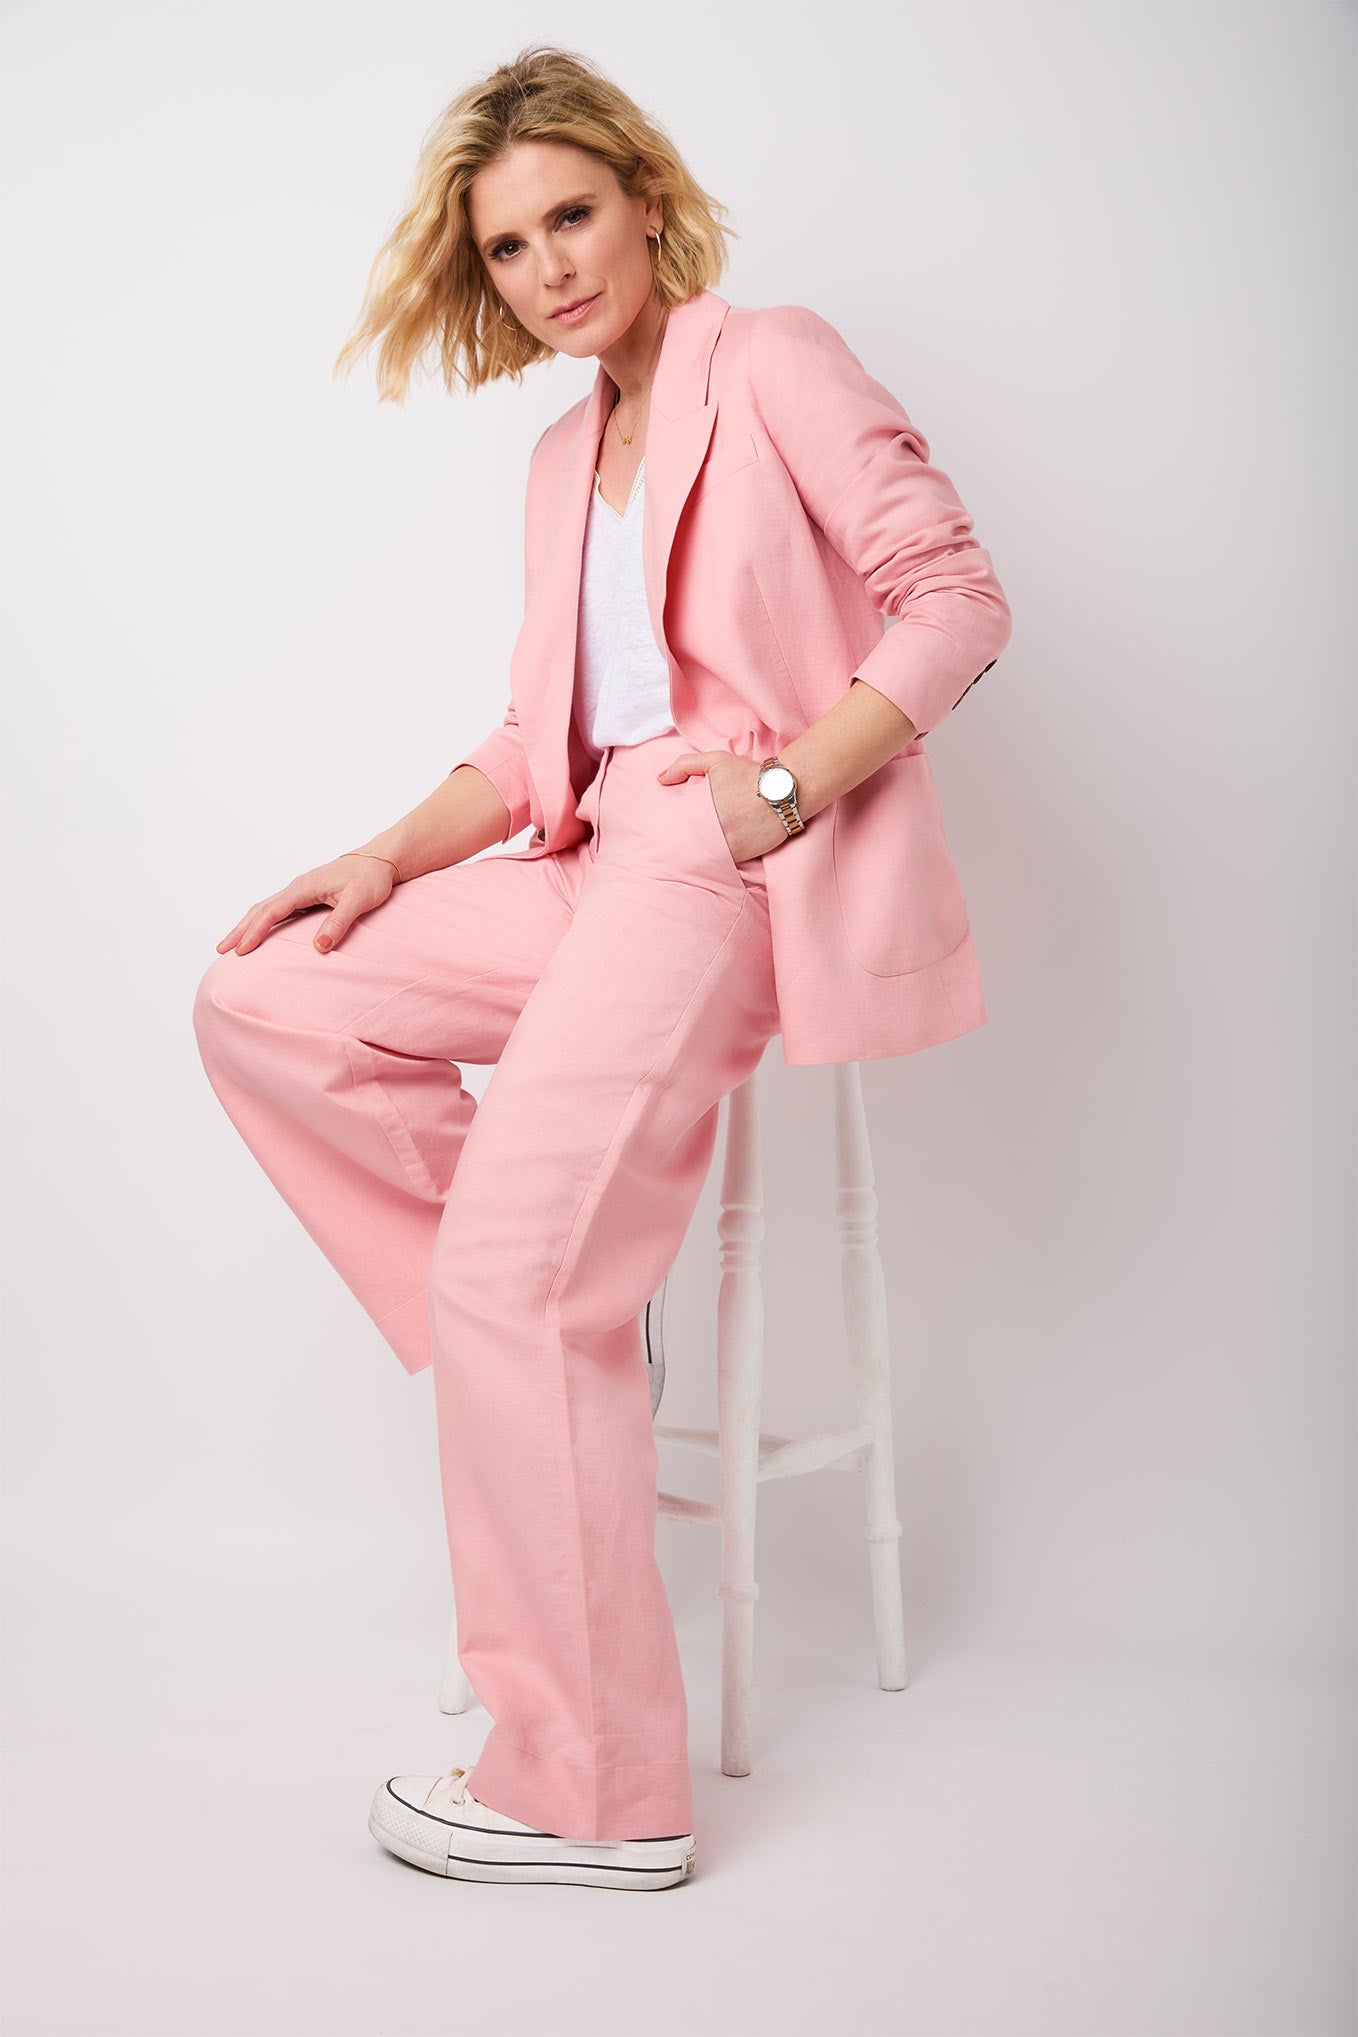 Premium Photo  An adult woman in a bright pink trouser suit and a white  top poses on a city street